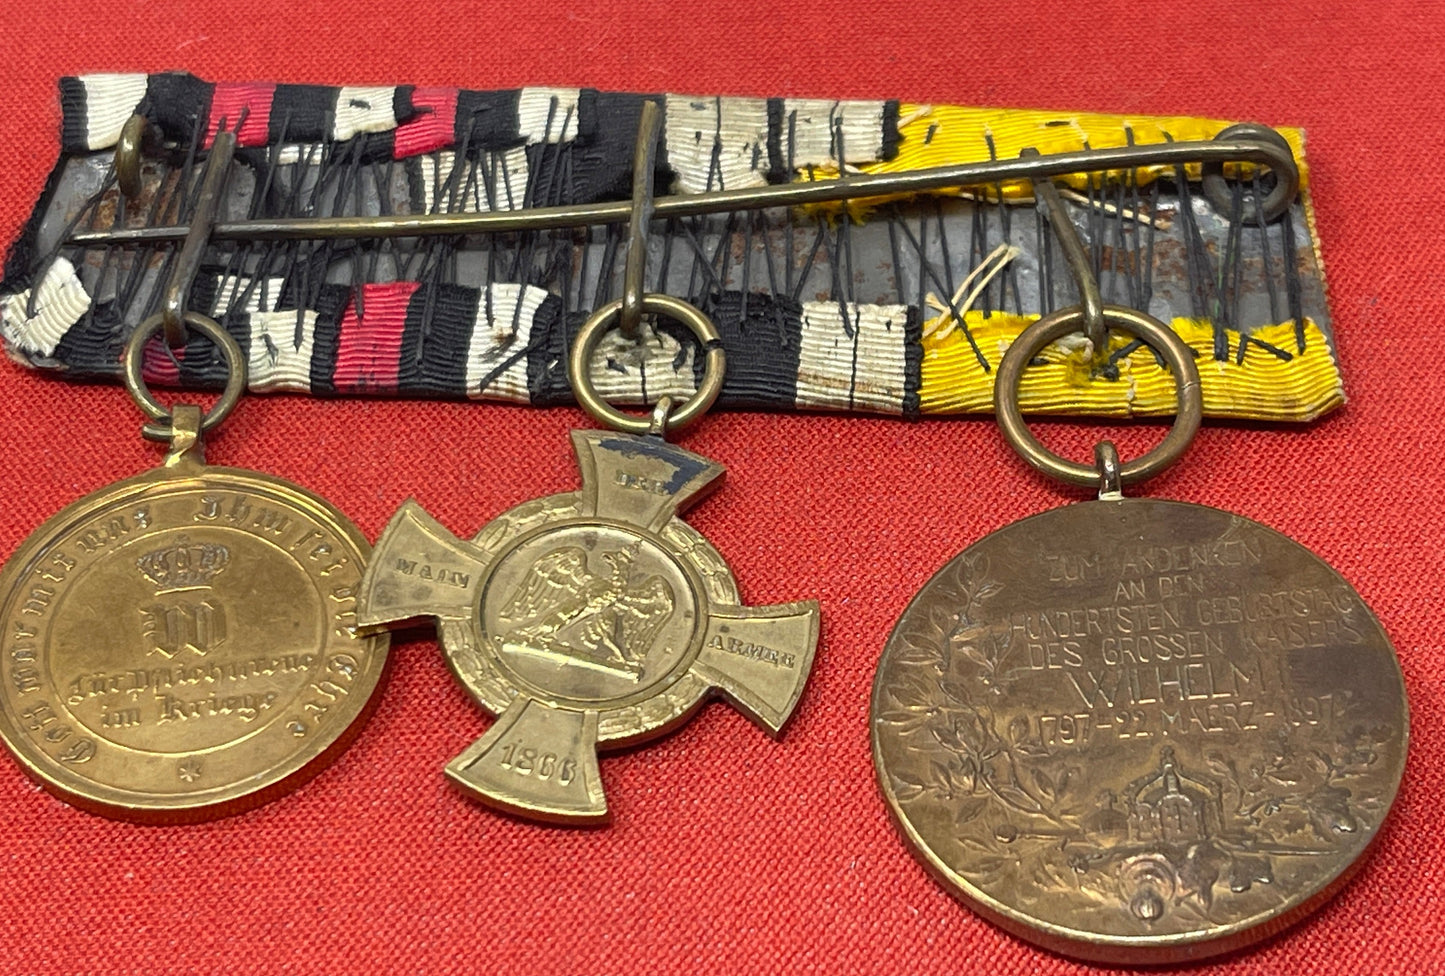 WW1 mounted medal group Franco-Prussian